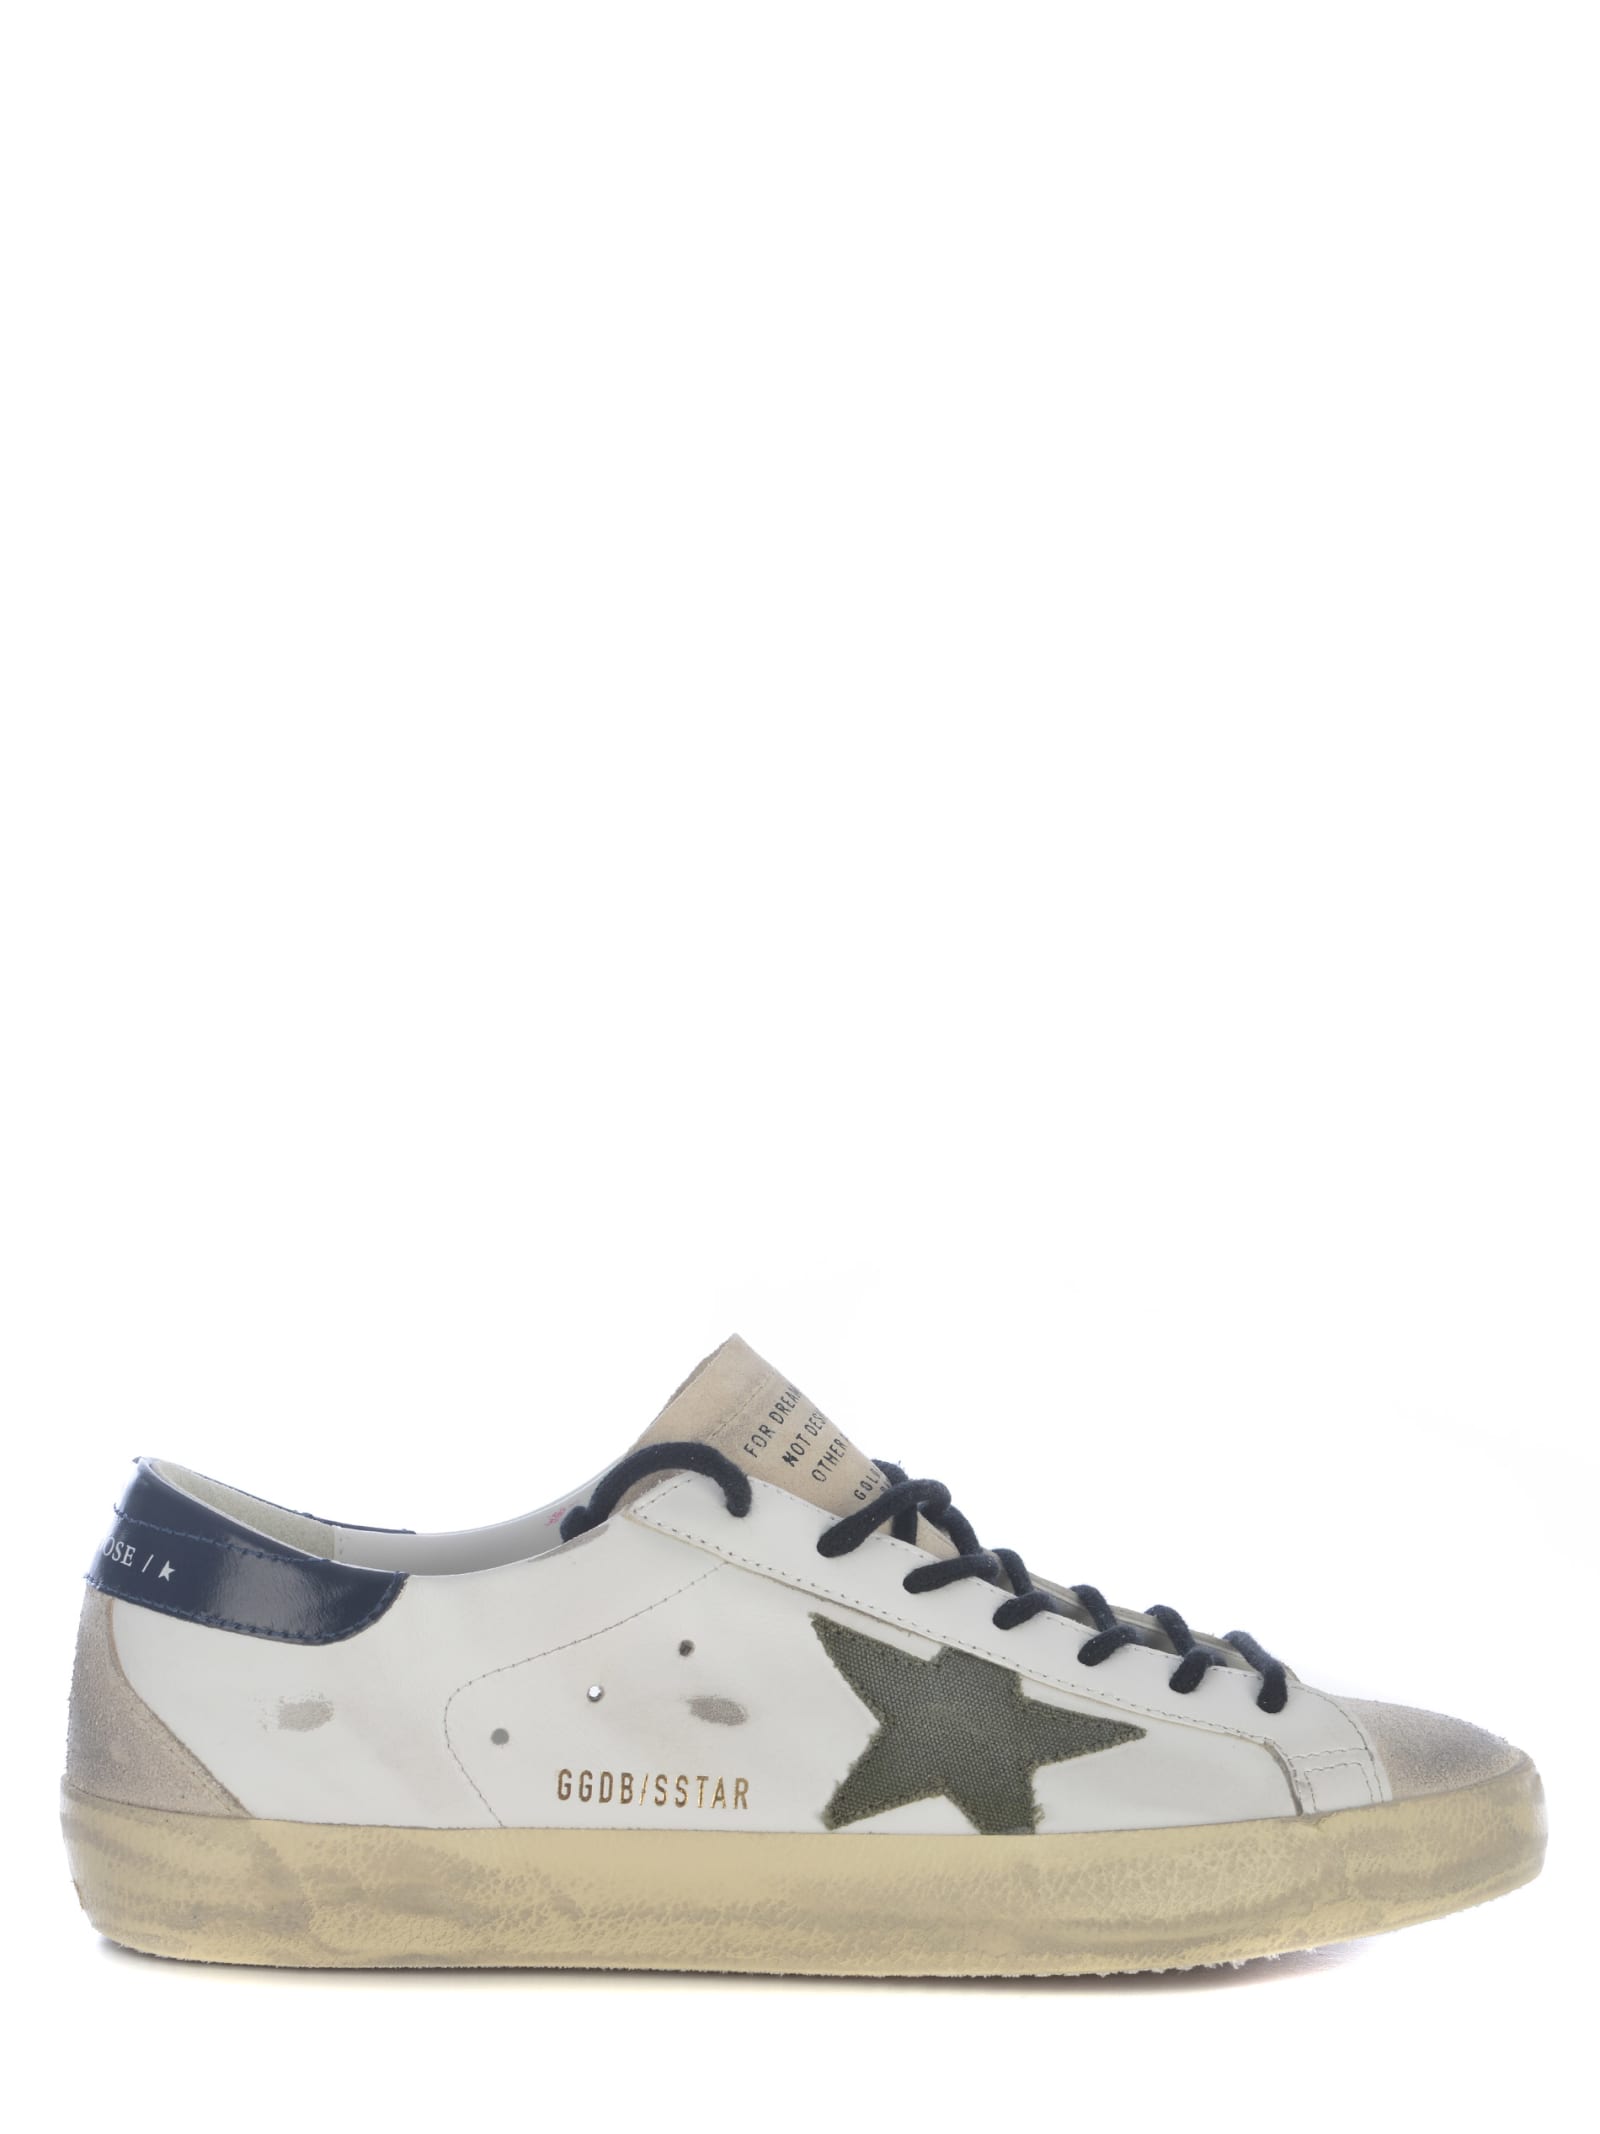 GOLDEN GOOSE SNEAKERS GOLDEN GOOSE SUPER STAR MADE OF LEATHER